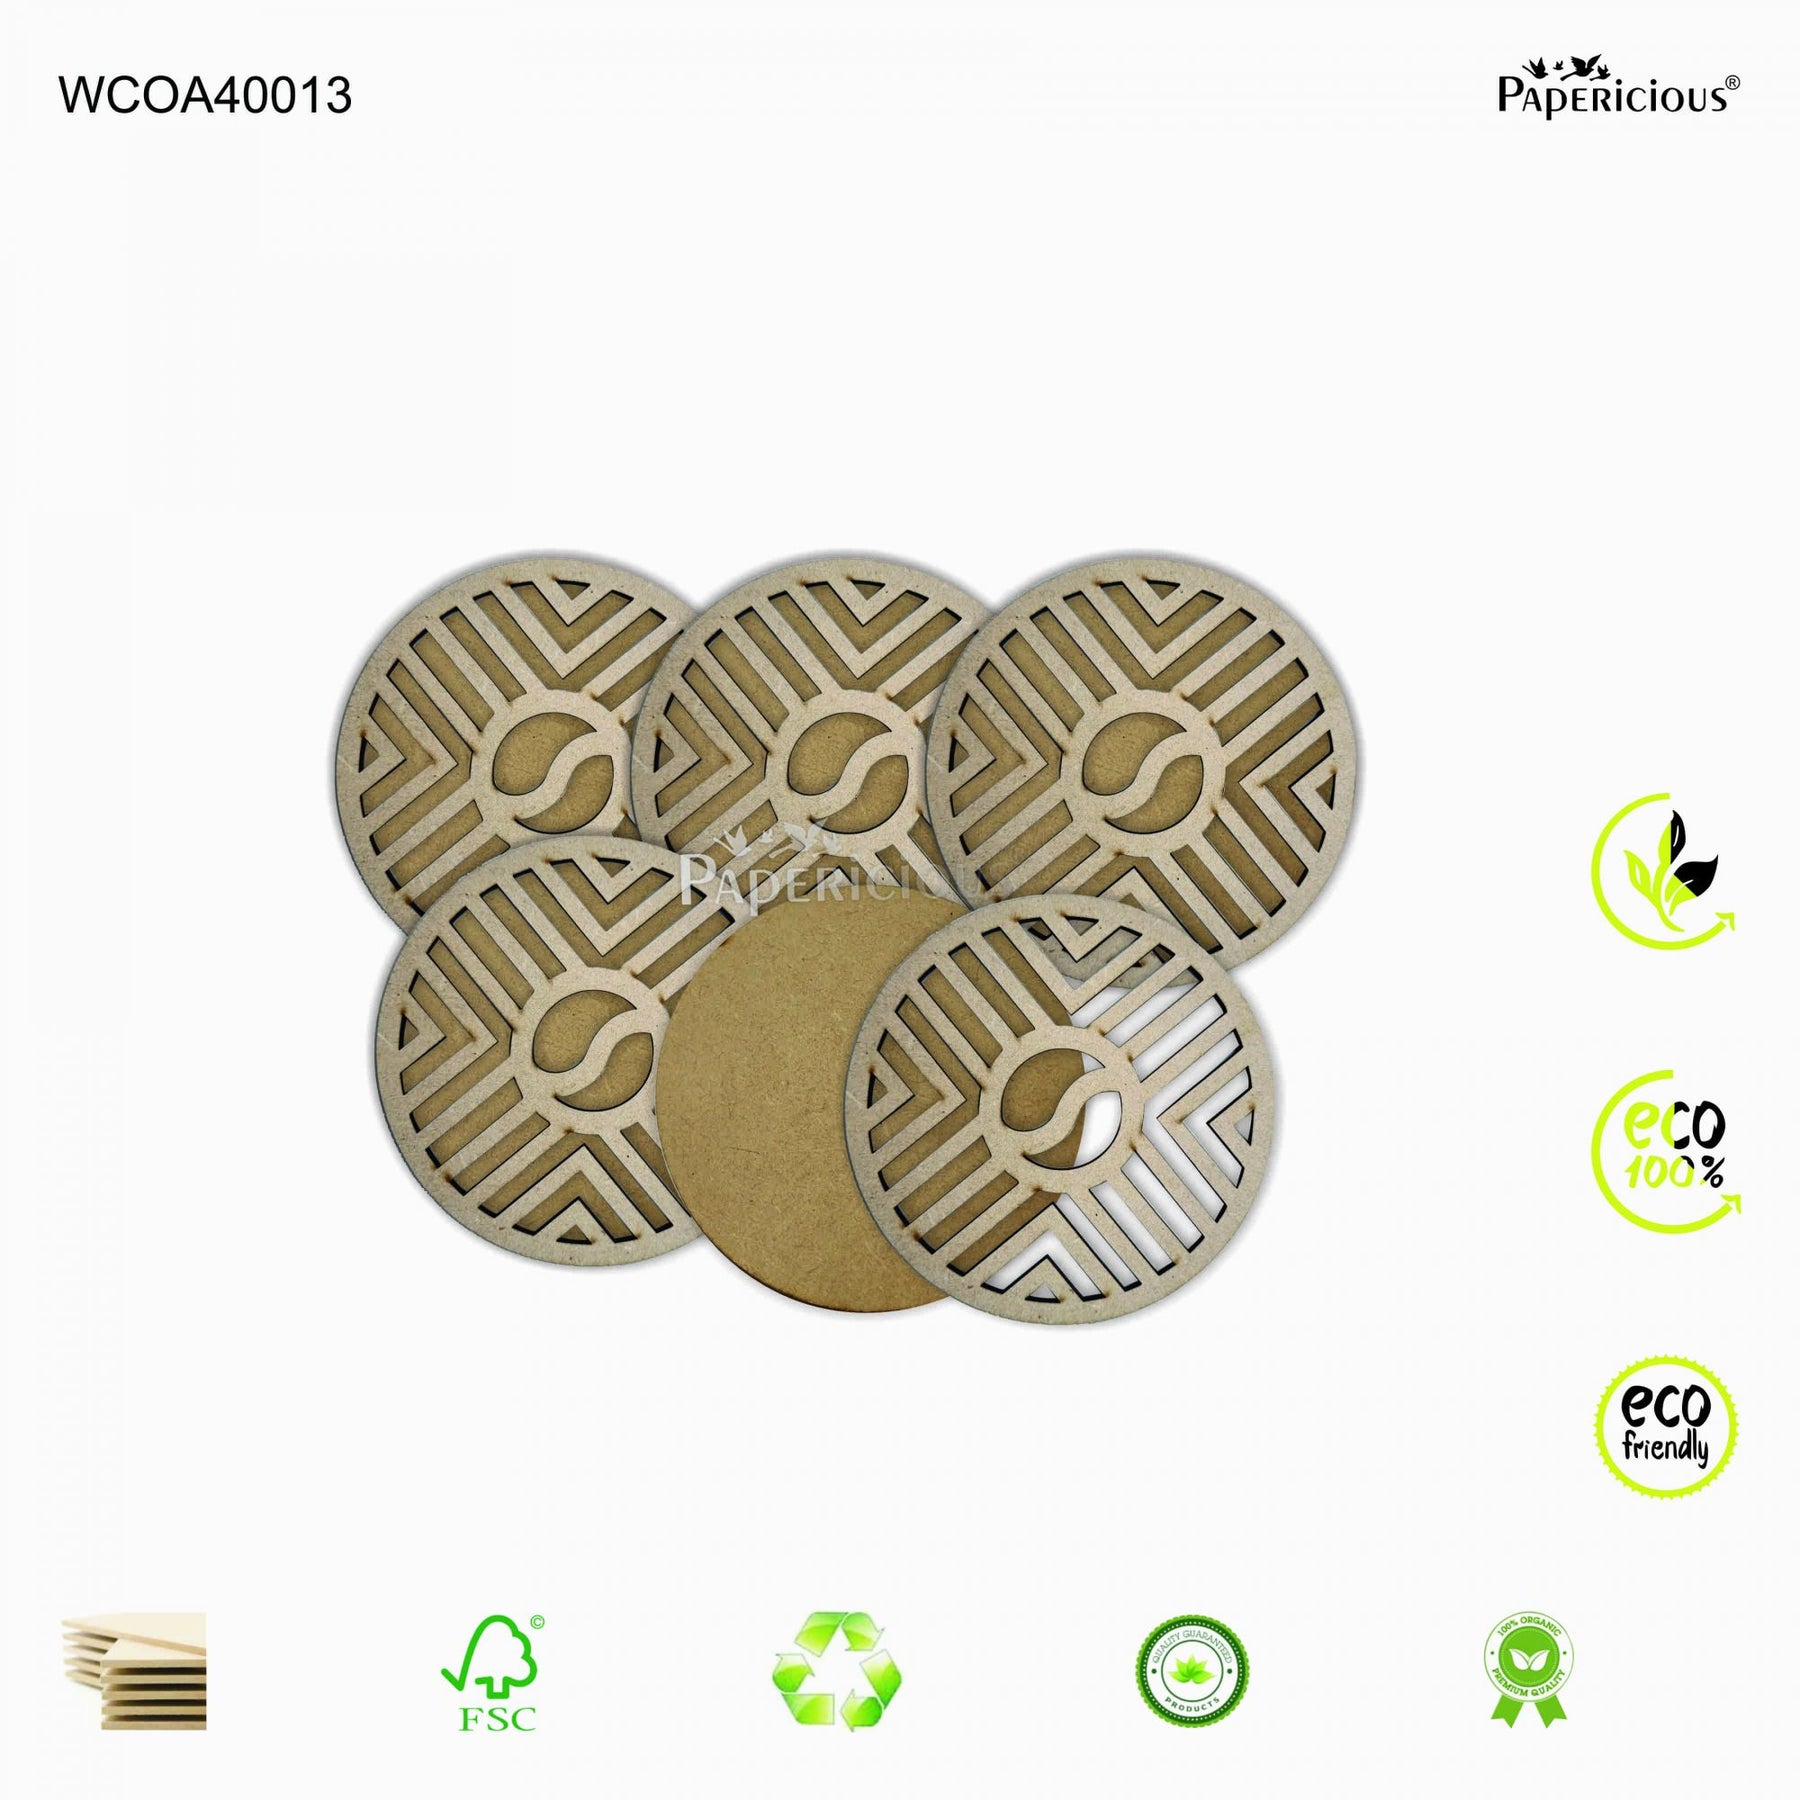 PAPERICIOUS Laser Cut Coasters - Campa - 3.75 x3.75 inch